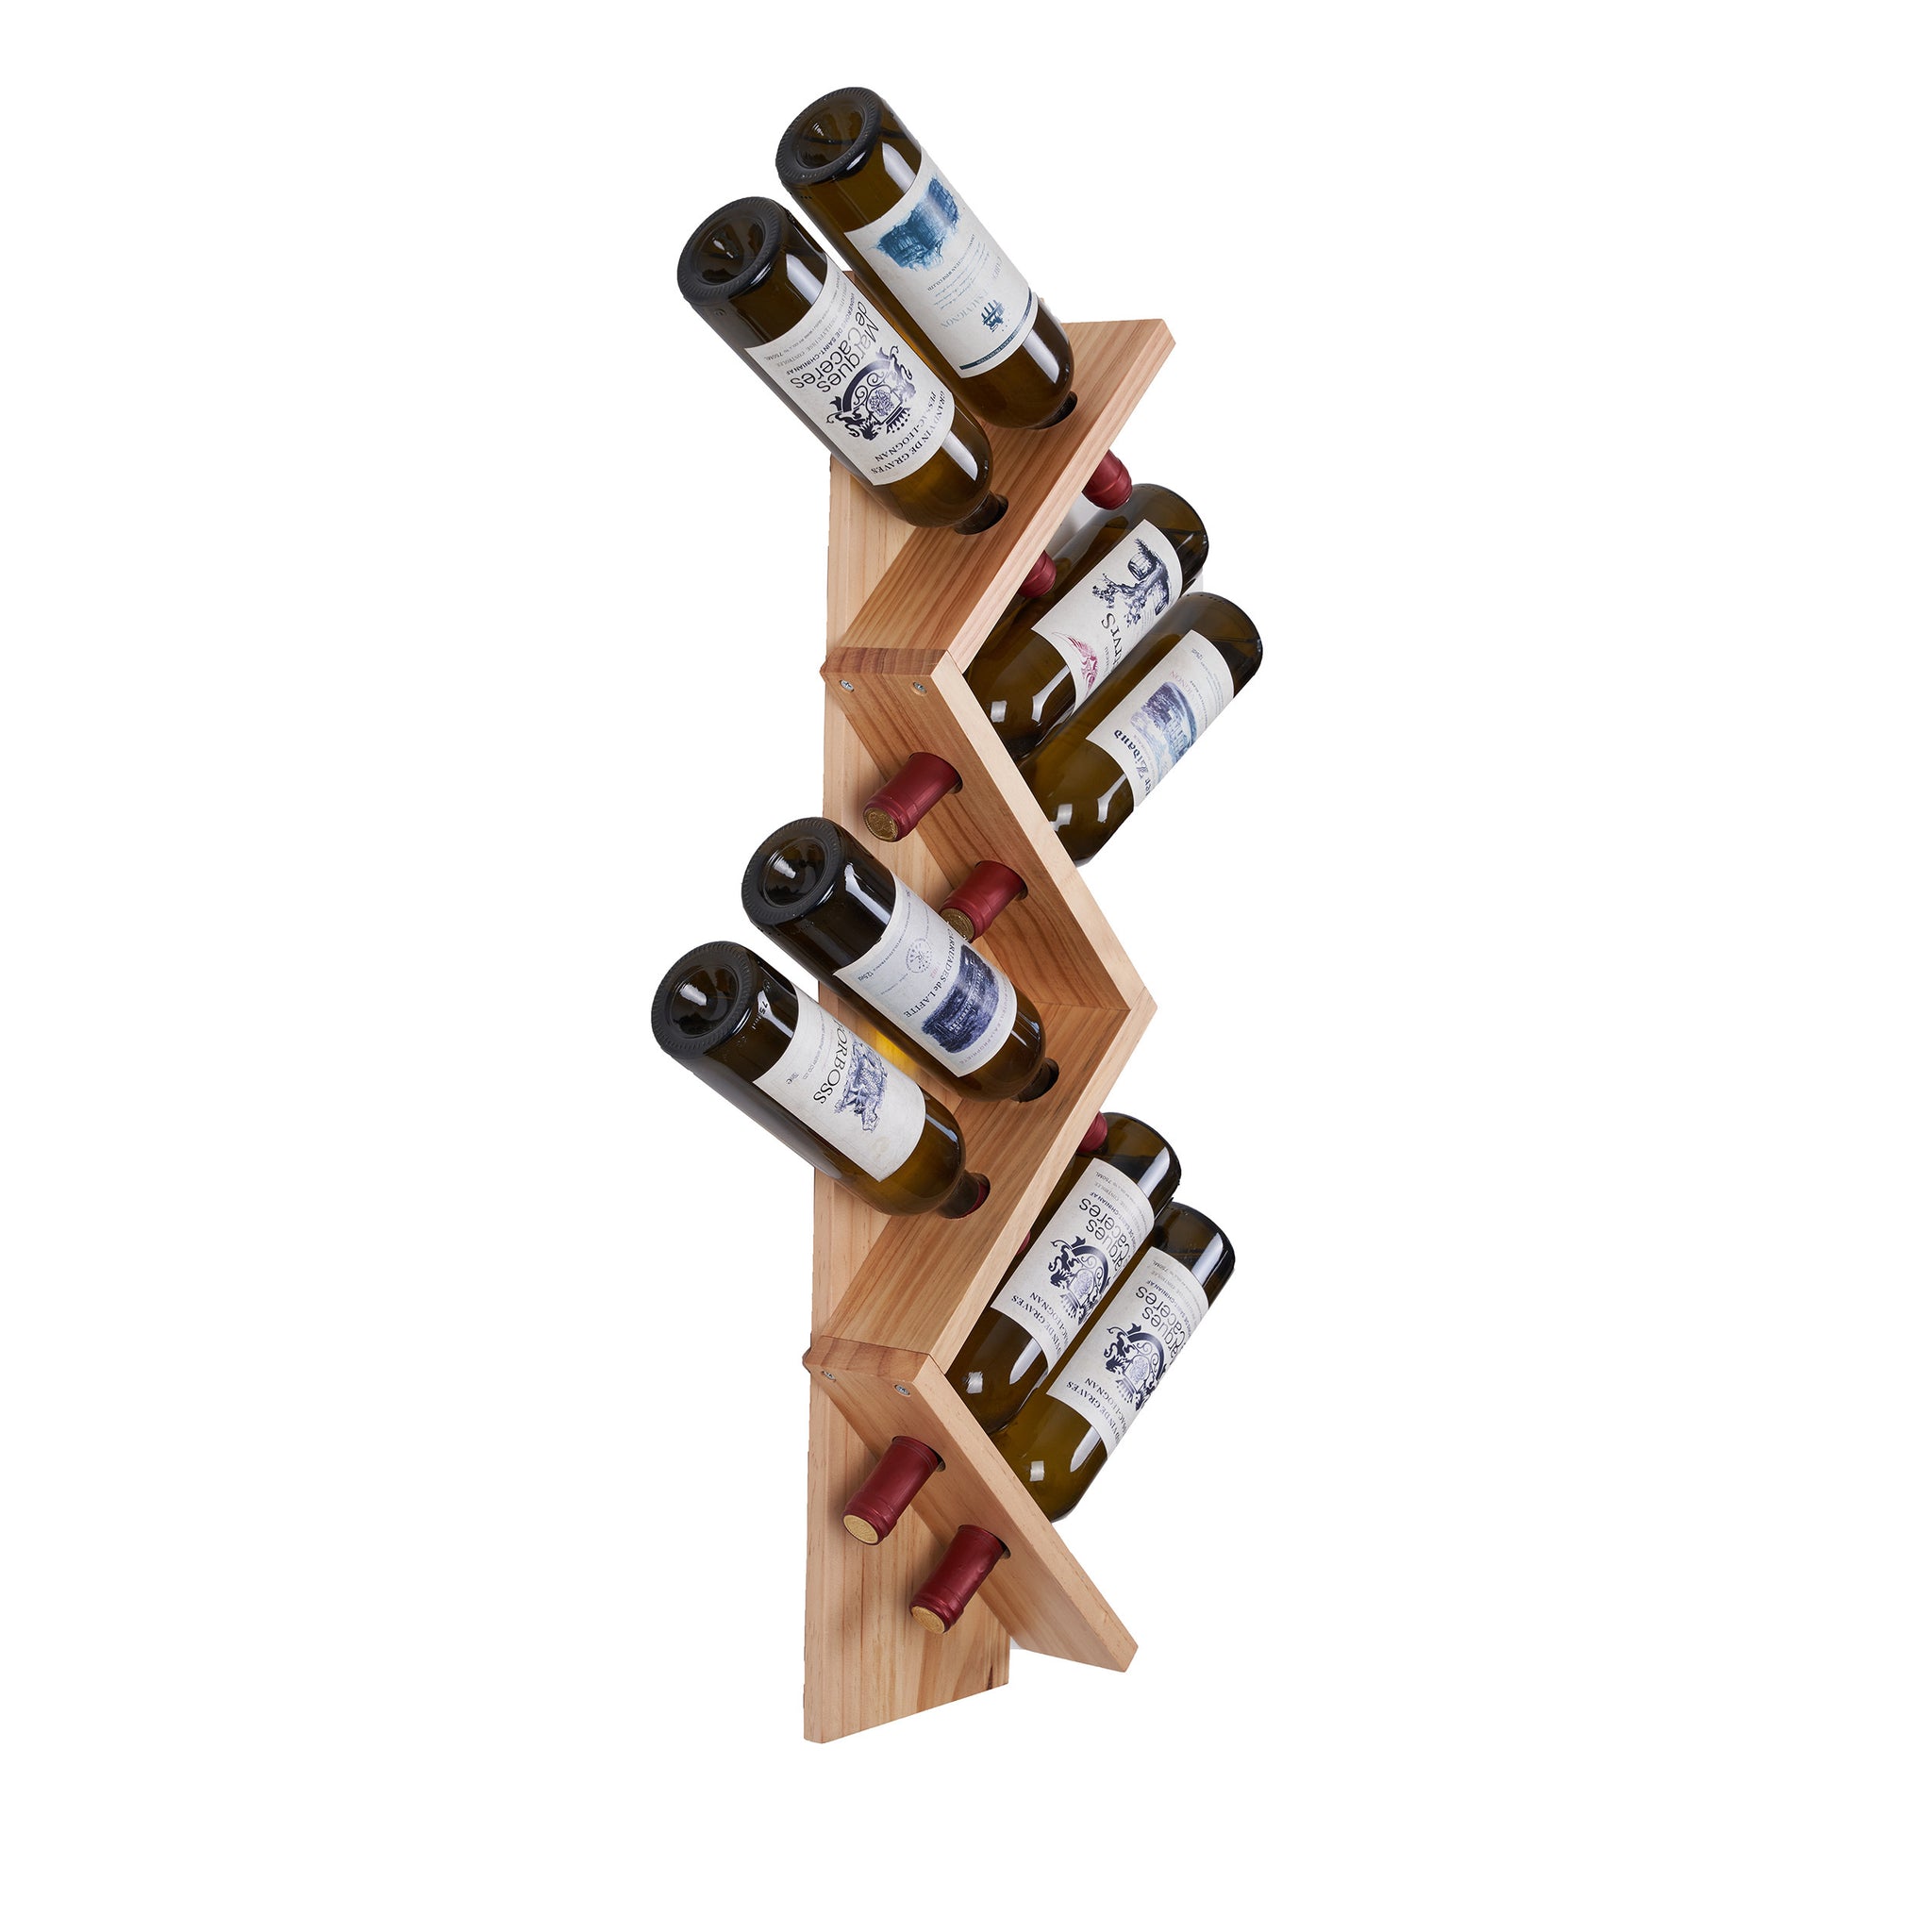 Vertical Z wine rack wine rack wall mounted Solid wood natural-kitchen-american traditional-pine